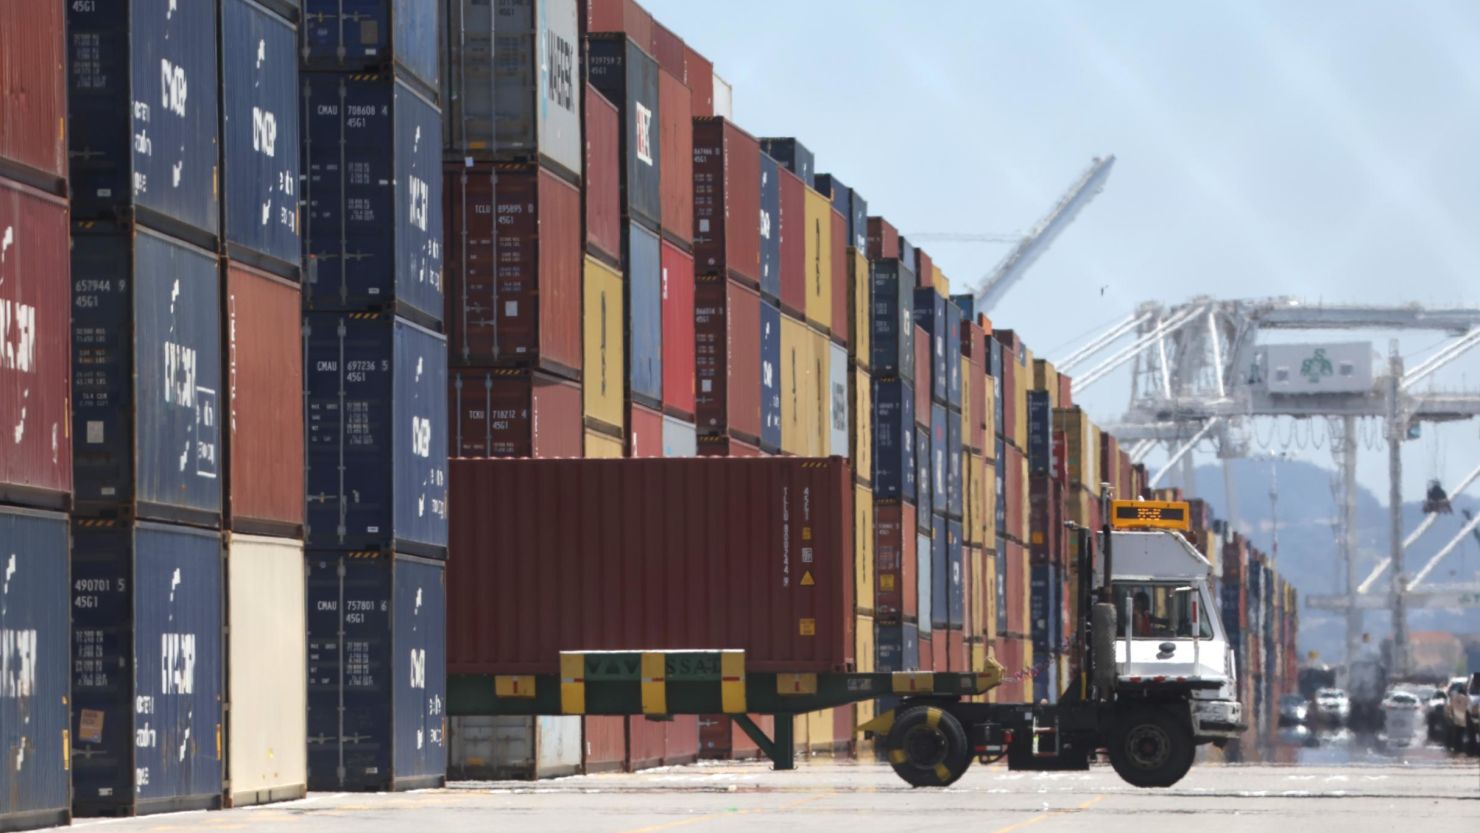 A truck drives by stacks of shipping containers at the Port of Oakland in California on May 20, 2022.